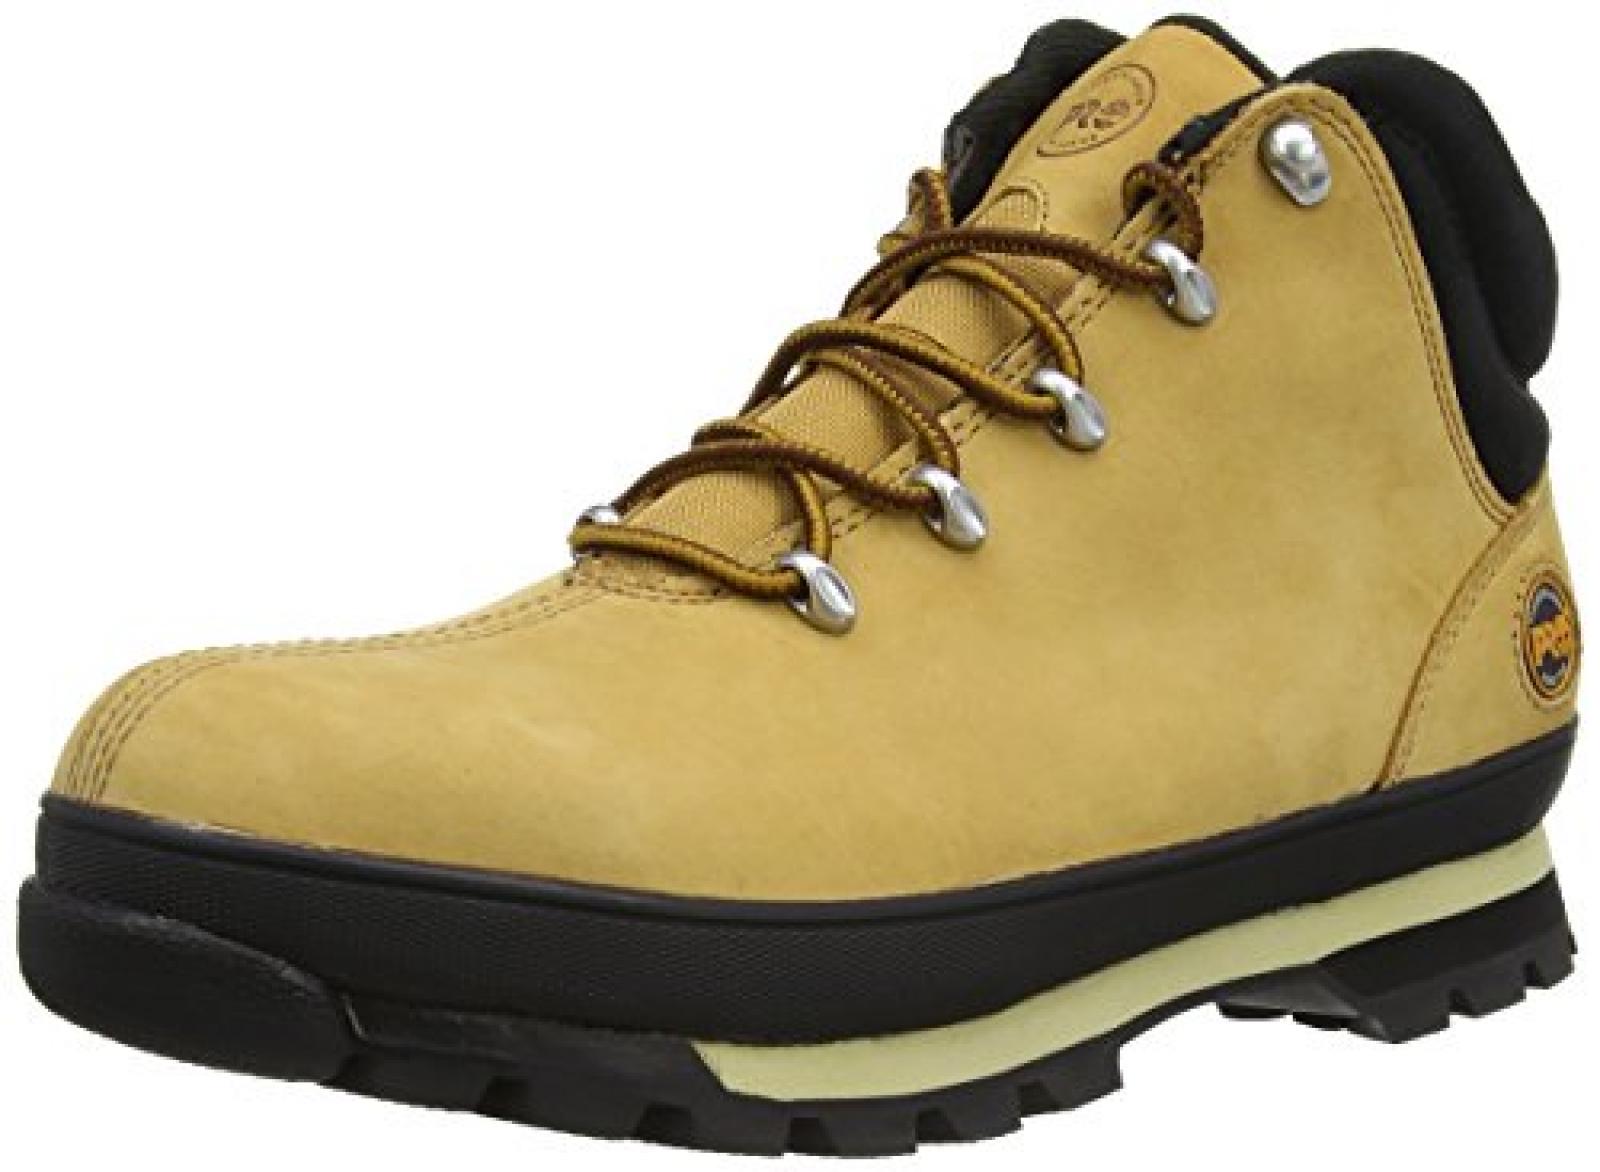 Timberland Pro Split Rock Pro Safety Boot with SMS Herren Stiefel 